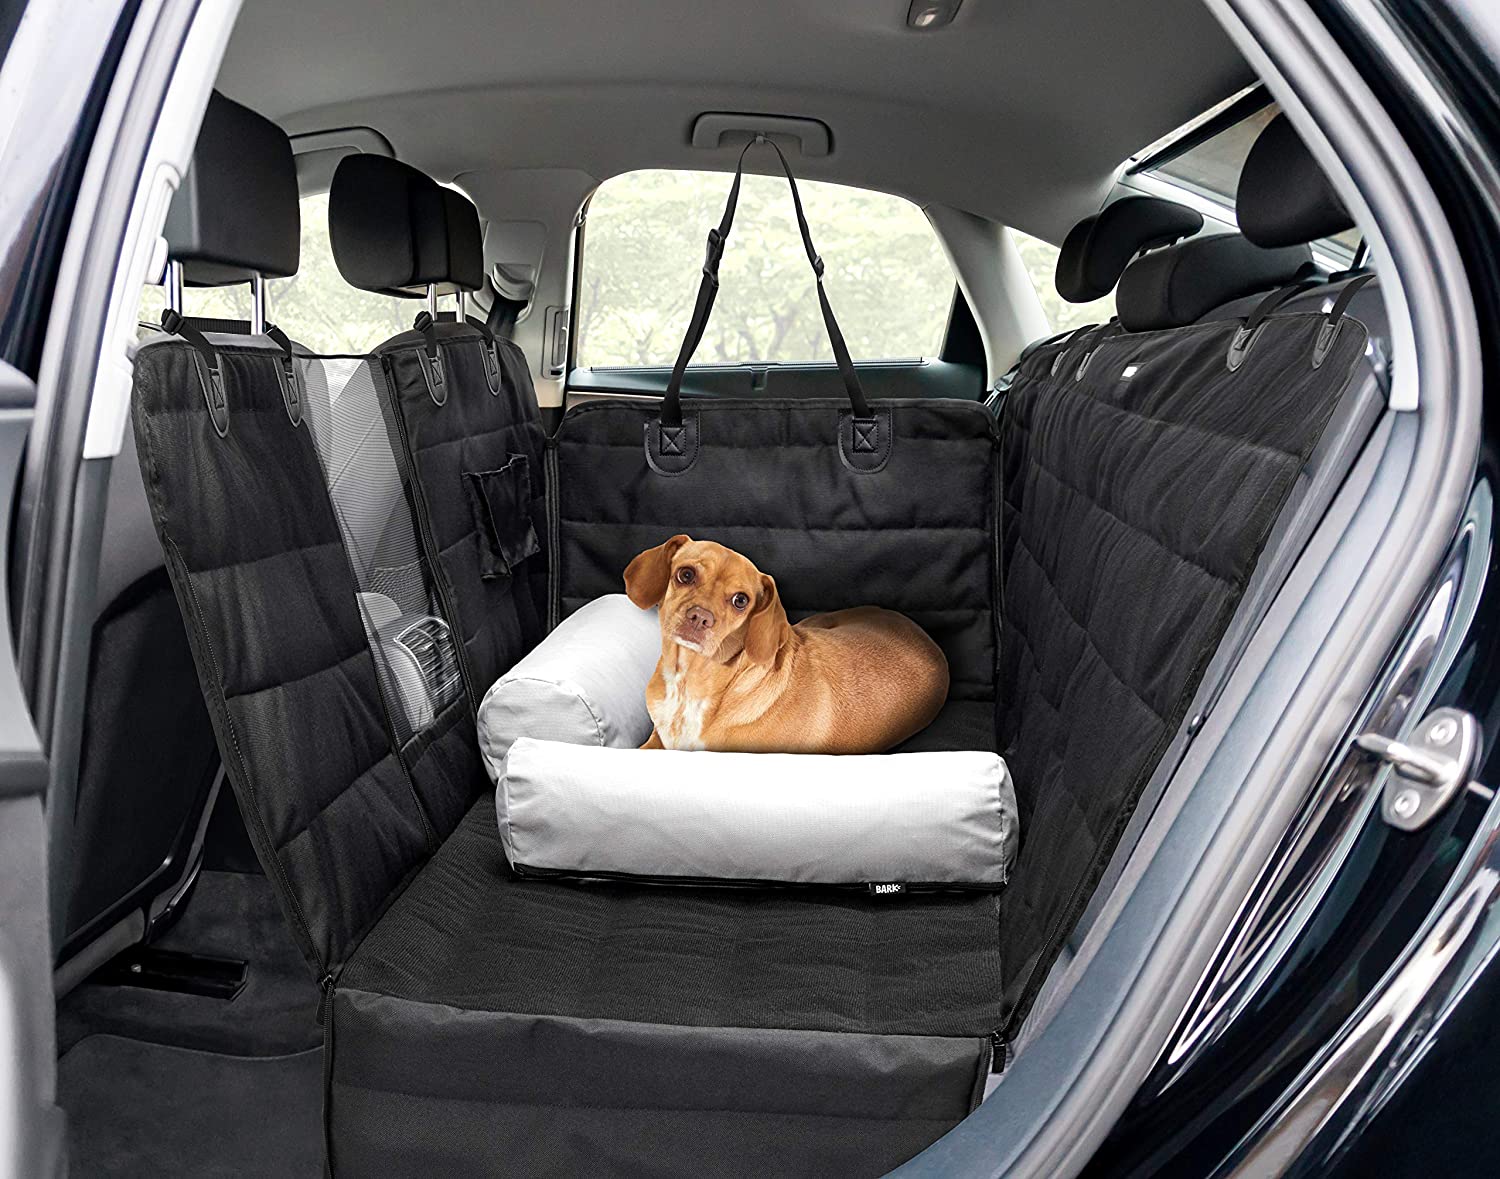 Top 10 Covers & Dog Blankets for Car Seats (Buying Guide)